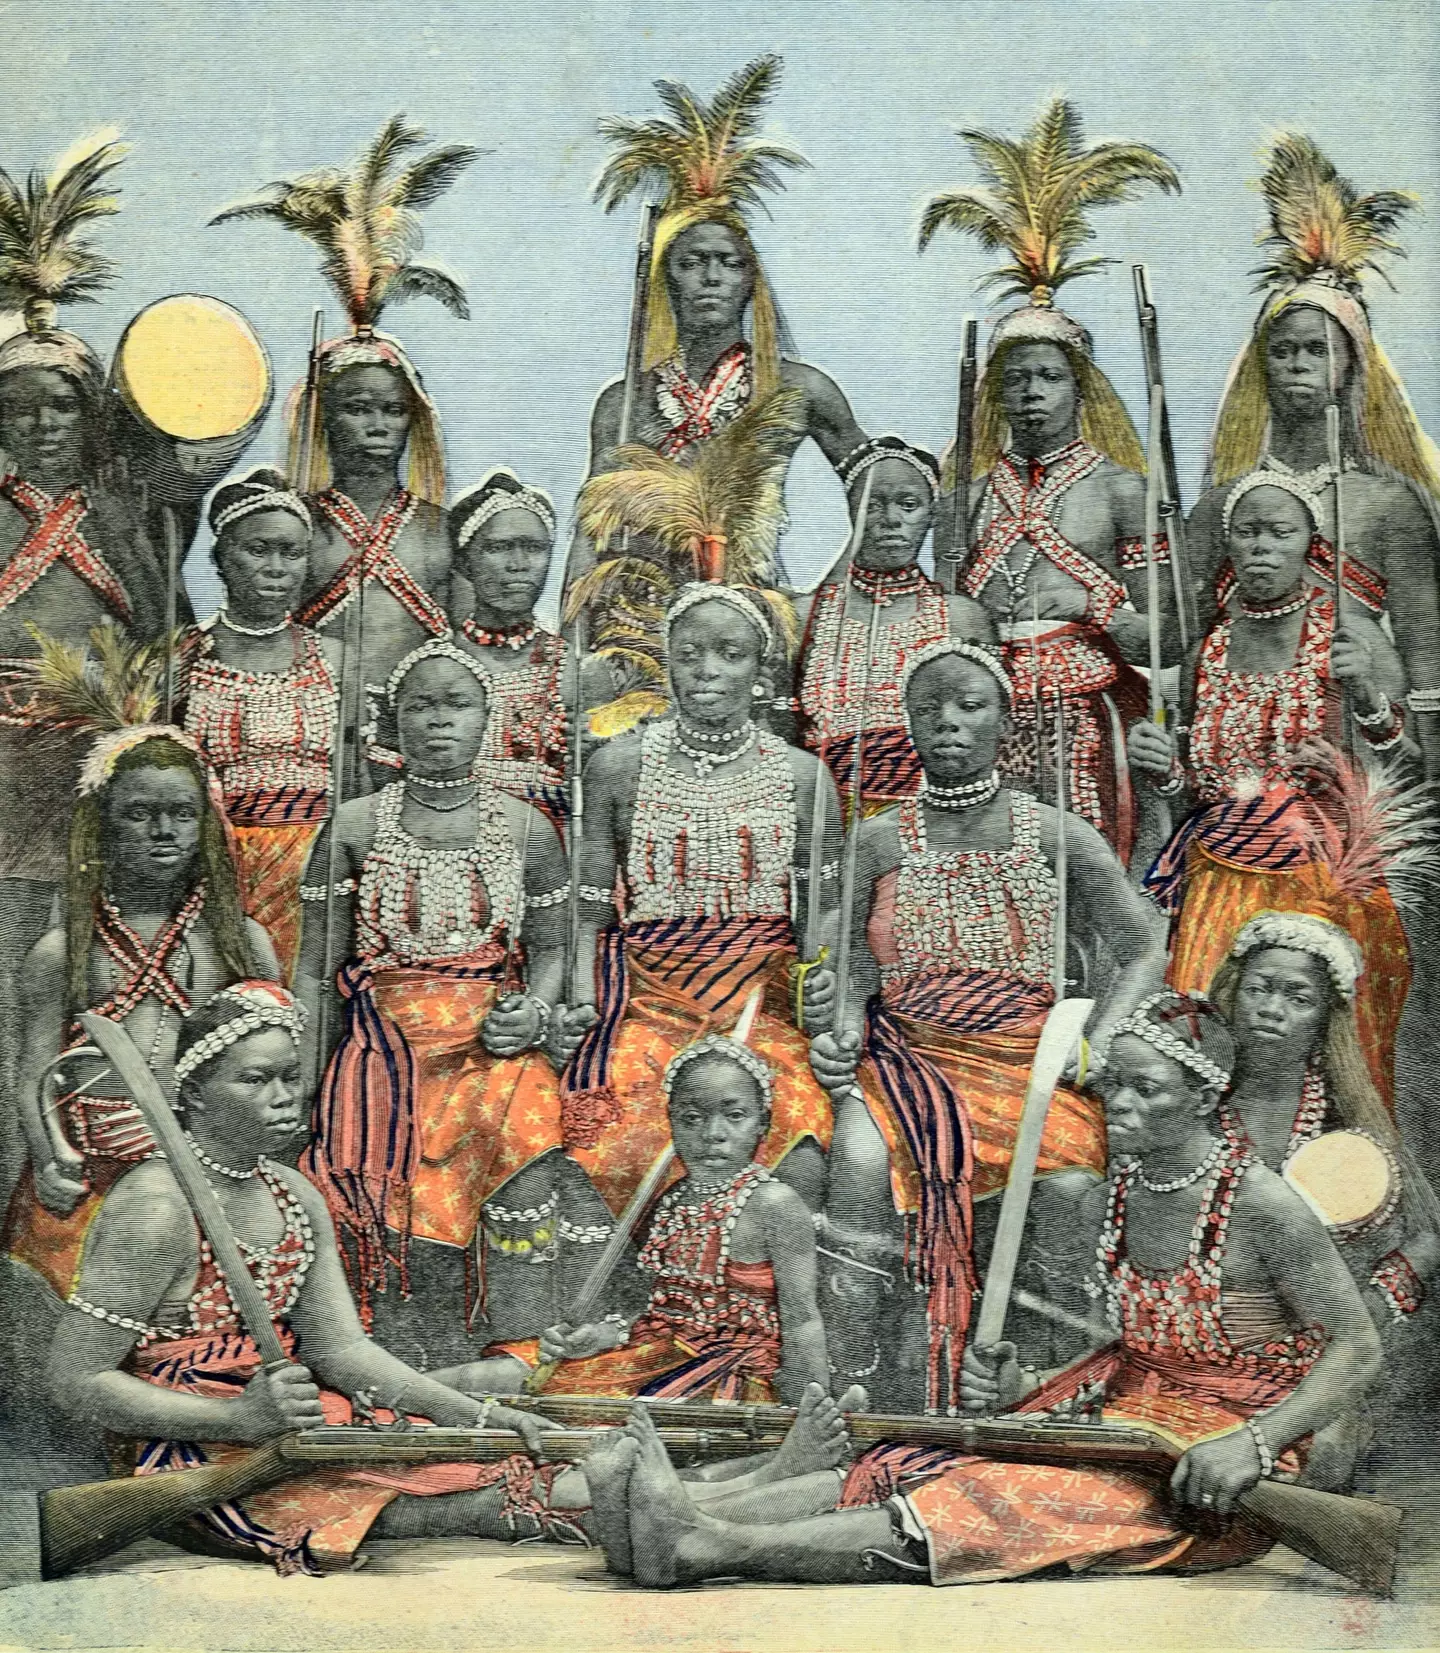 The Dahomey Amazons helped protect the kingdom and its leader.